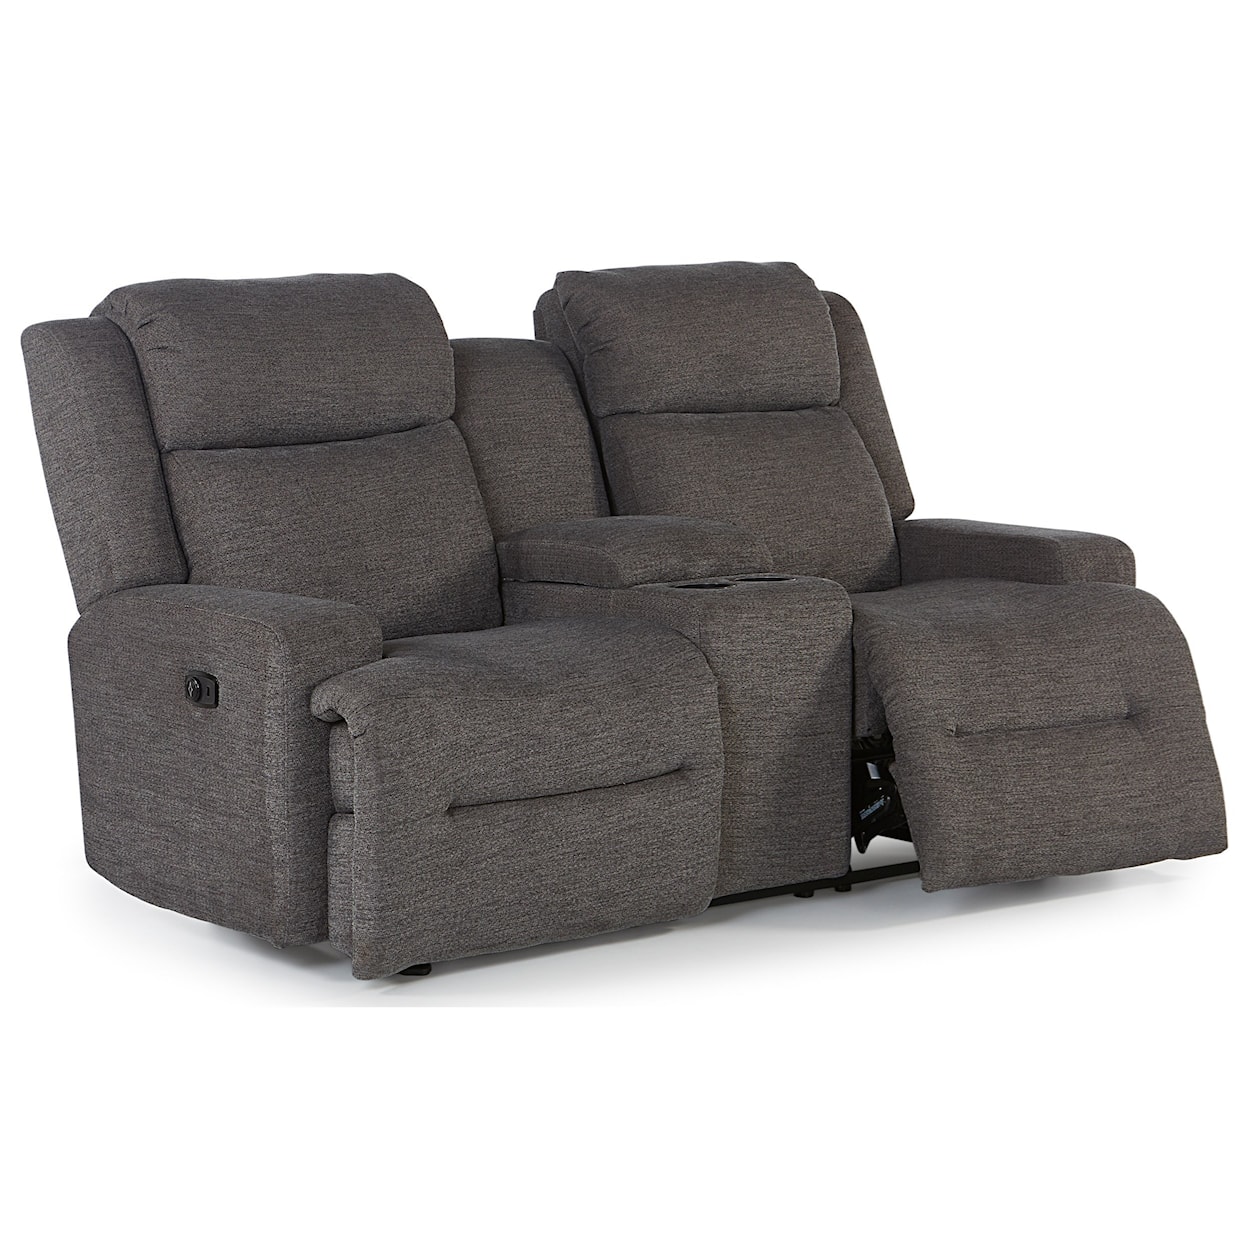 Best Home Furnishings O'Neil Rocking Console Reclining Loveseat